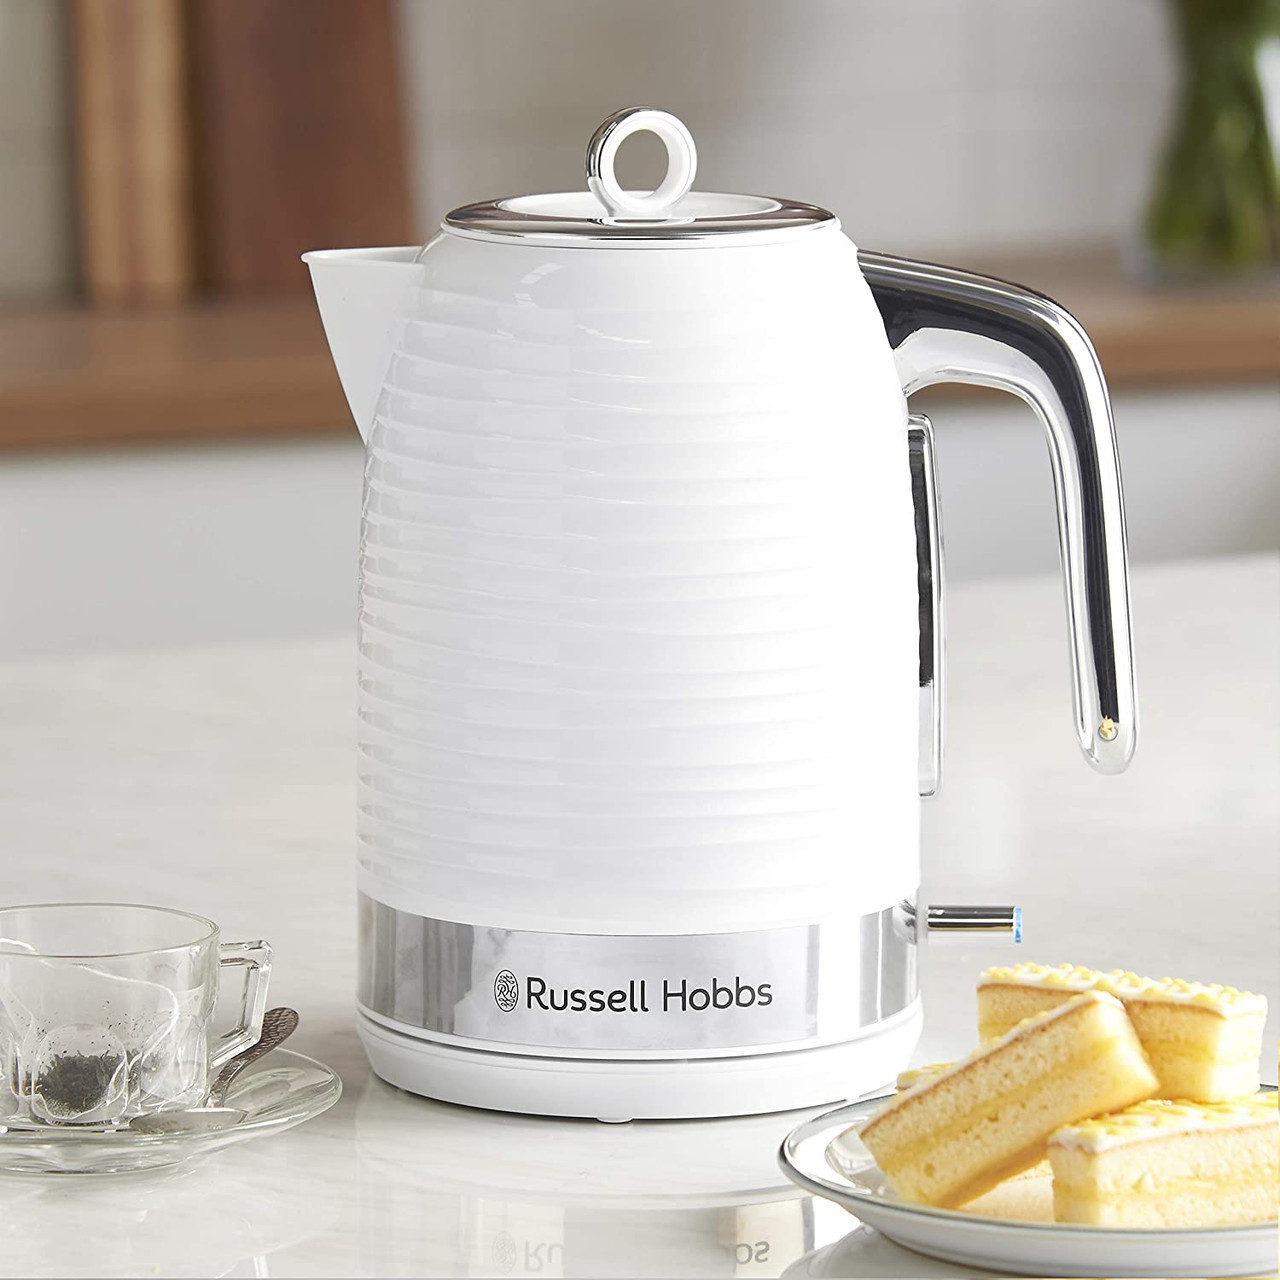  Russell Hobbs 2 in 1 Combined Electric Tea Maker and